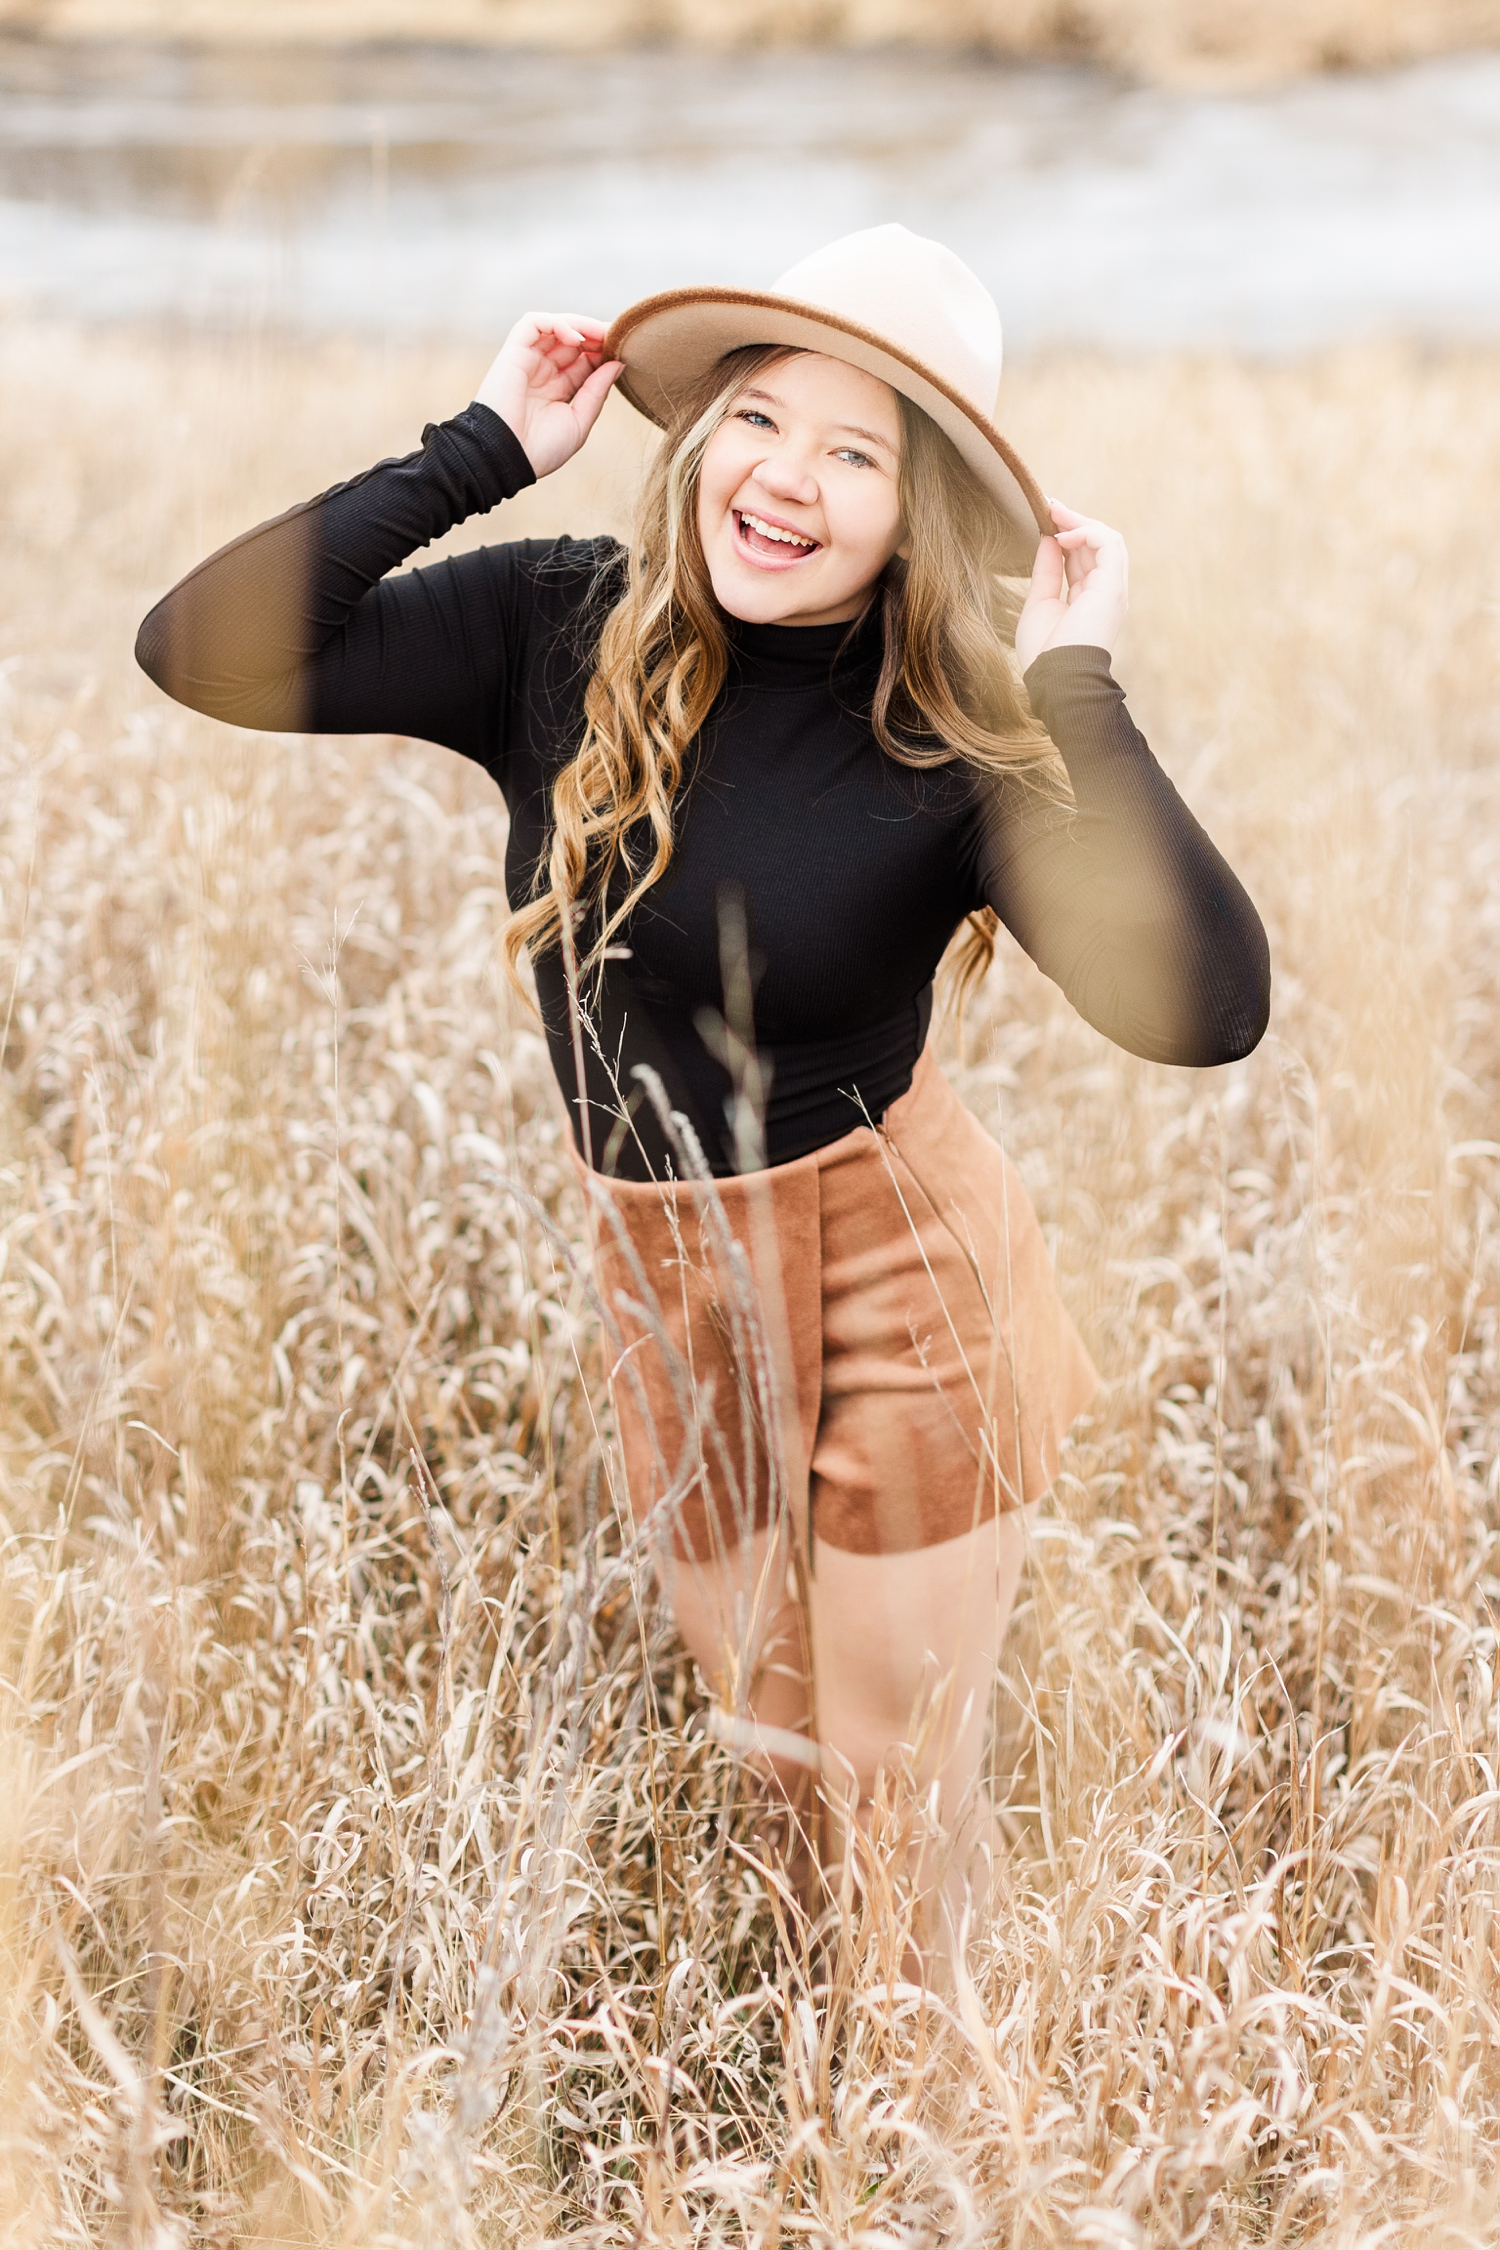 Sierra laughs as she stands in a dead grassy field, wearing a camel colored skort with a black turtleneck bodysuit and a camel colored, wide brim hat from West Vendee | CB Studio